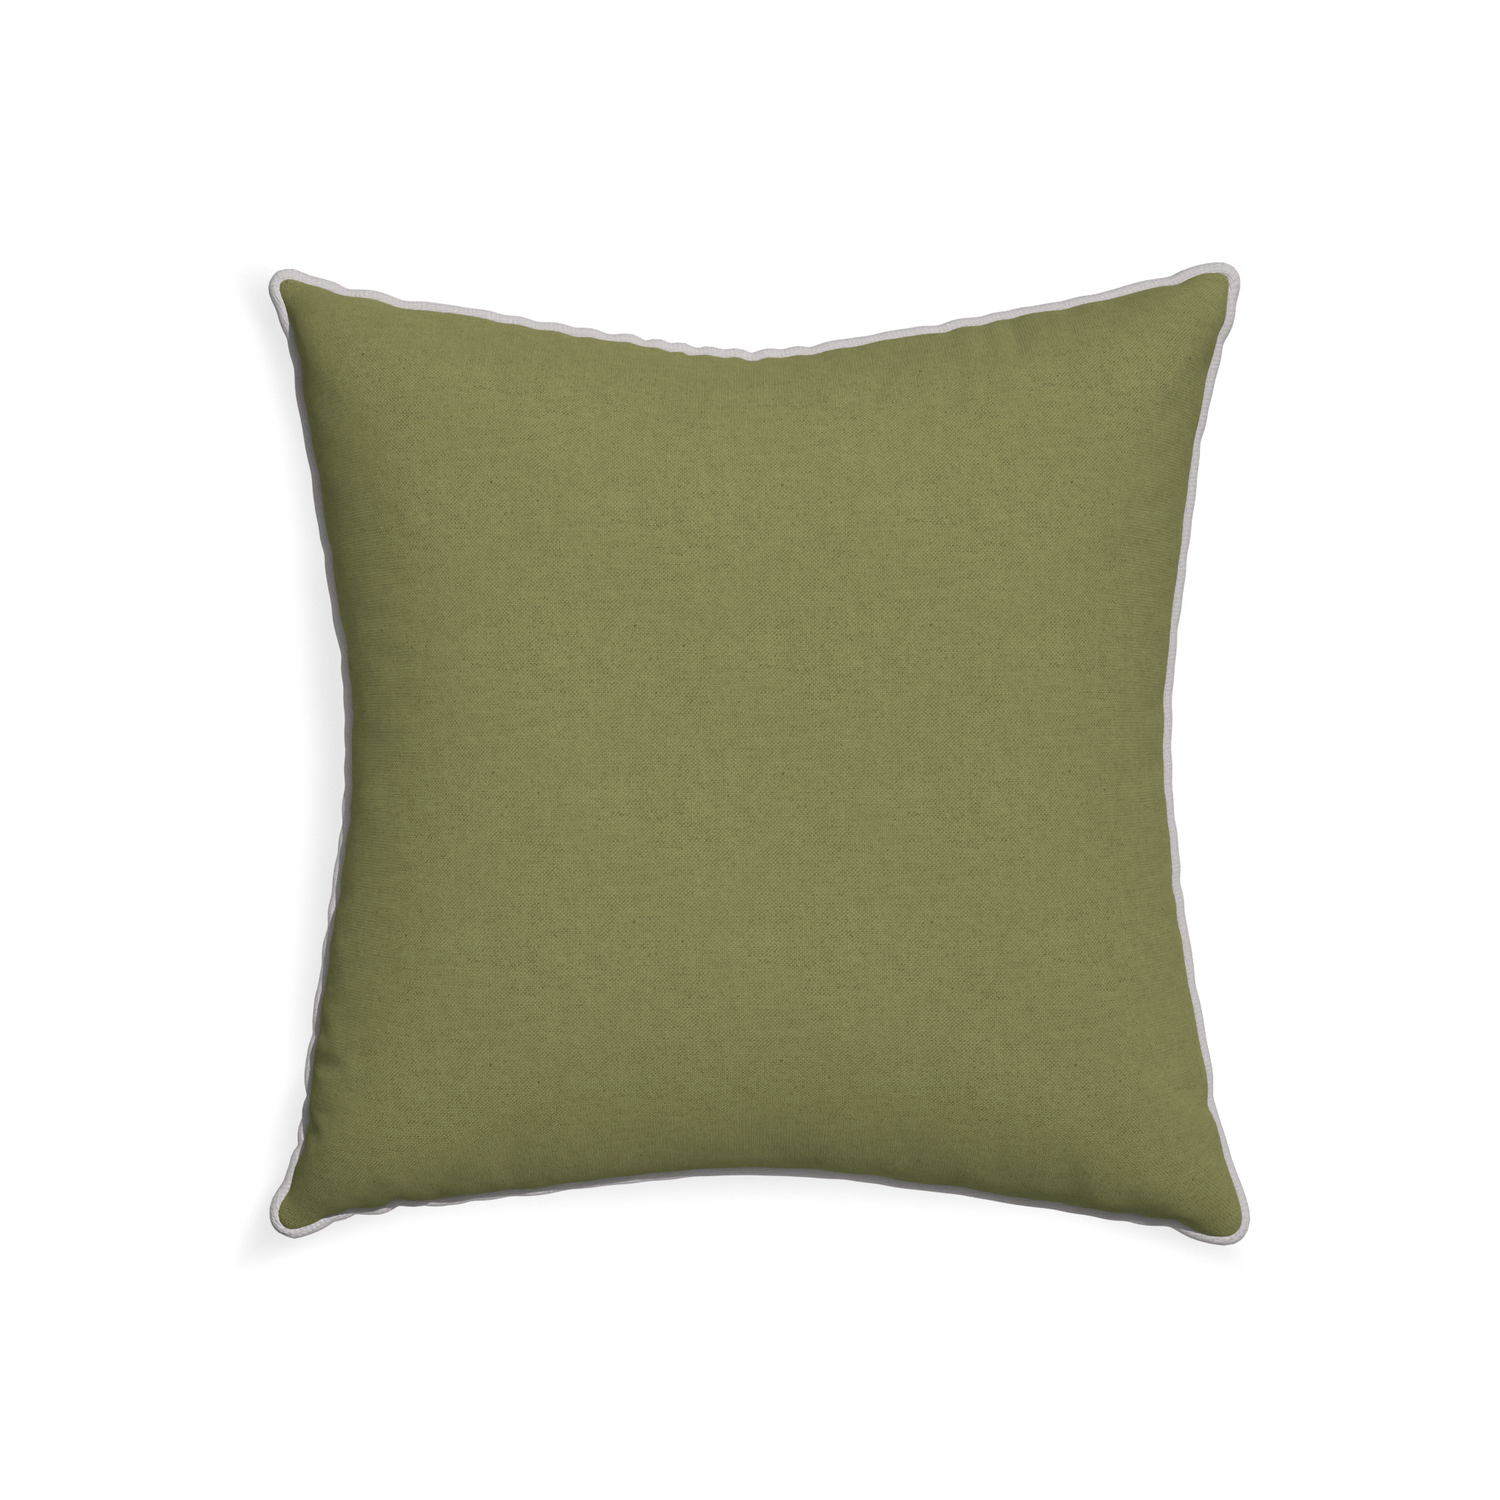 22-square moss custom moss greenpillow with pebble piping on white background